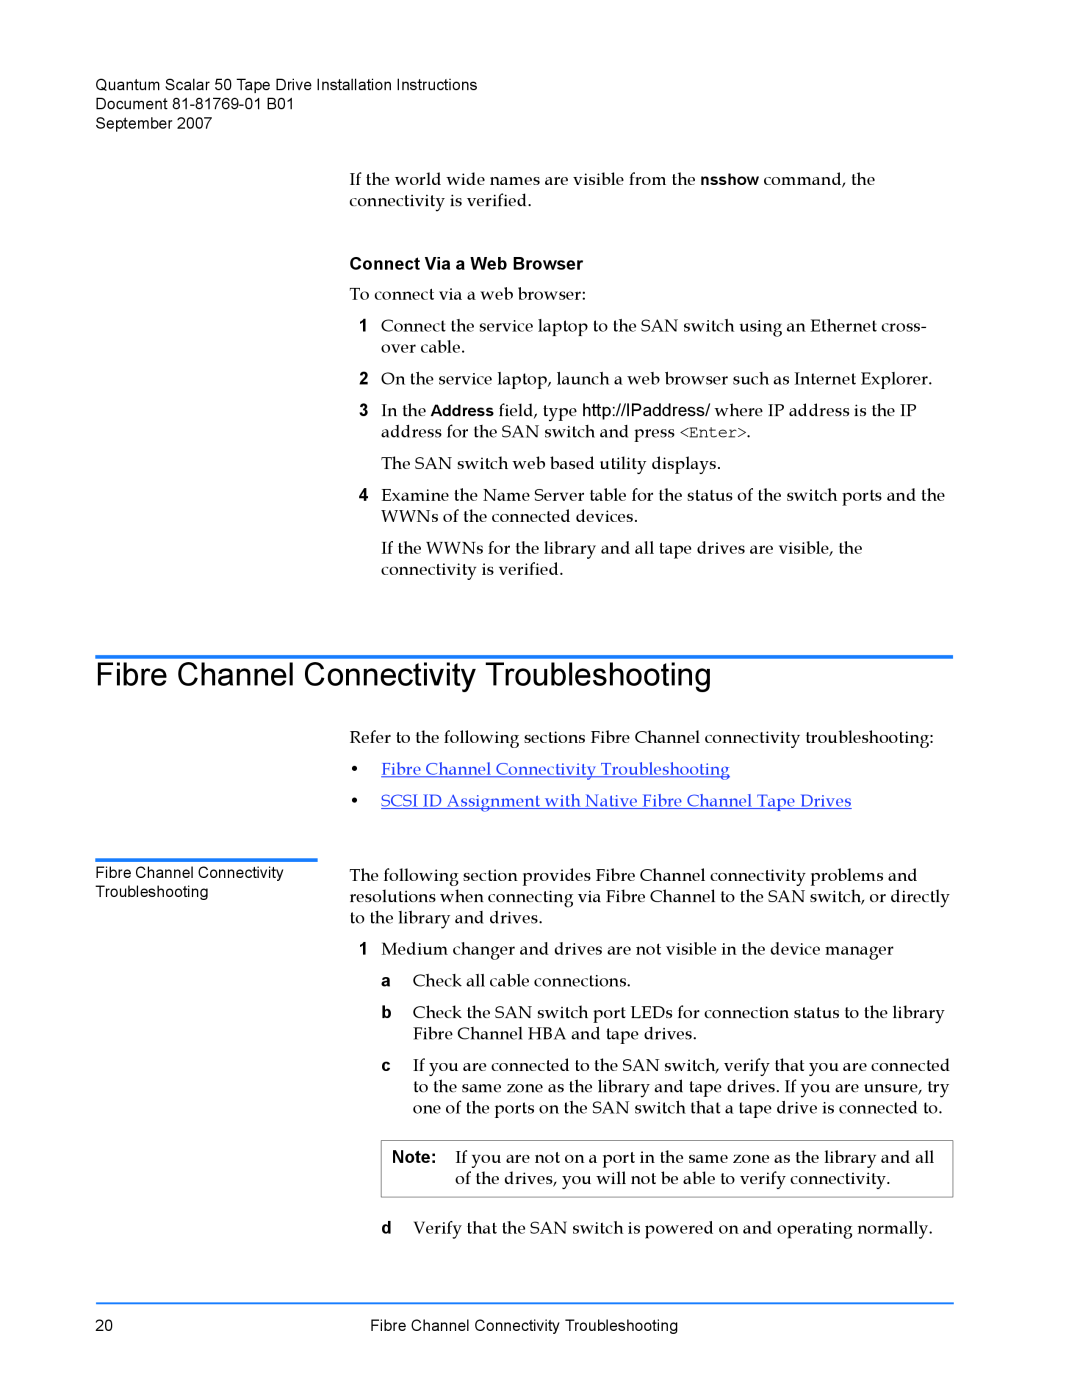 Quantum Audio Scalar 50 installation instructions Fibre Channel Connectivity Troubleshooting, Connect Via a Web Browser 